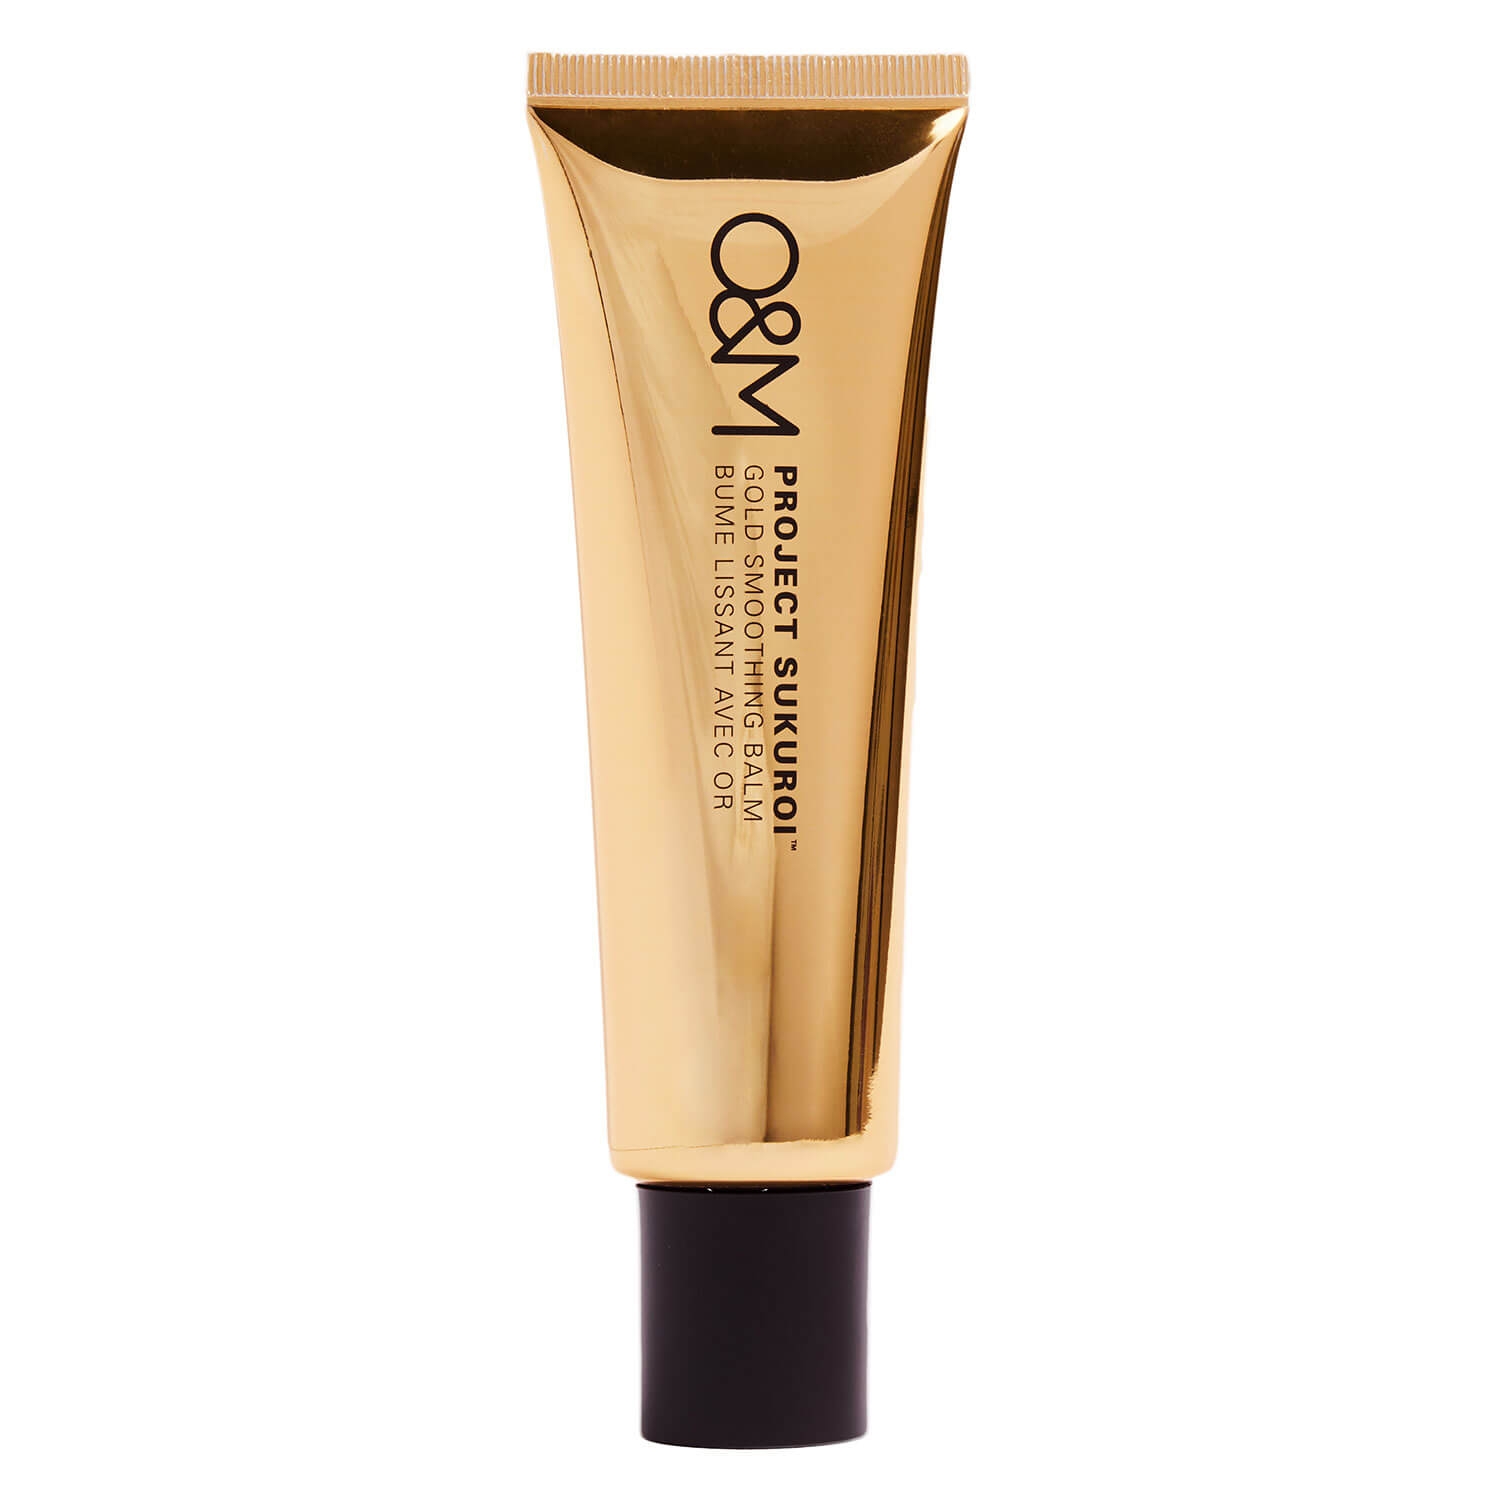 Product image from O&M Styling - Project Sukuroi Golden Smoothing Balm